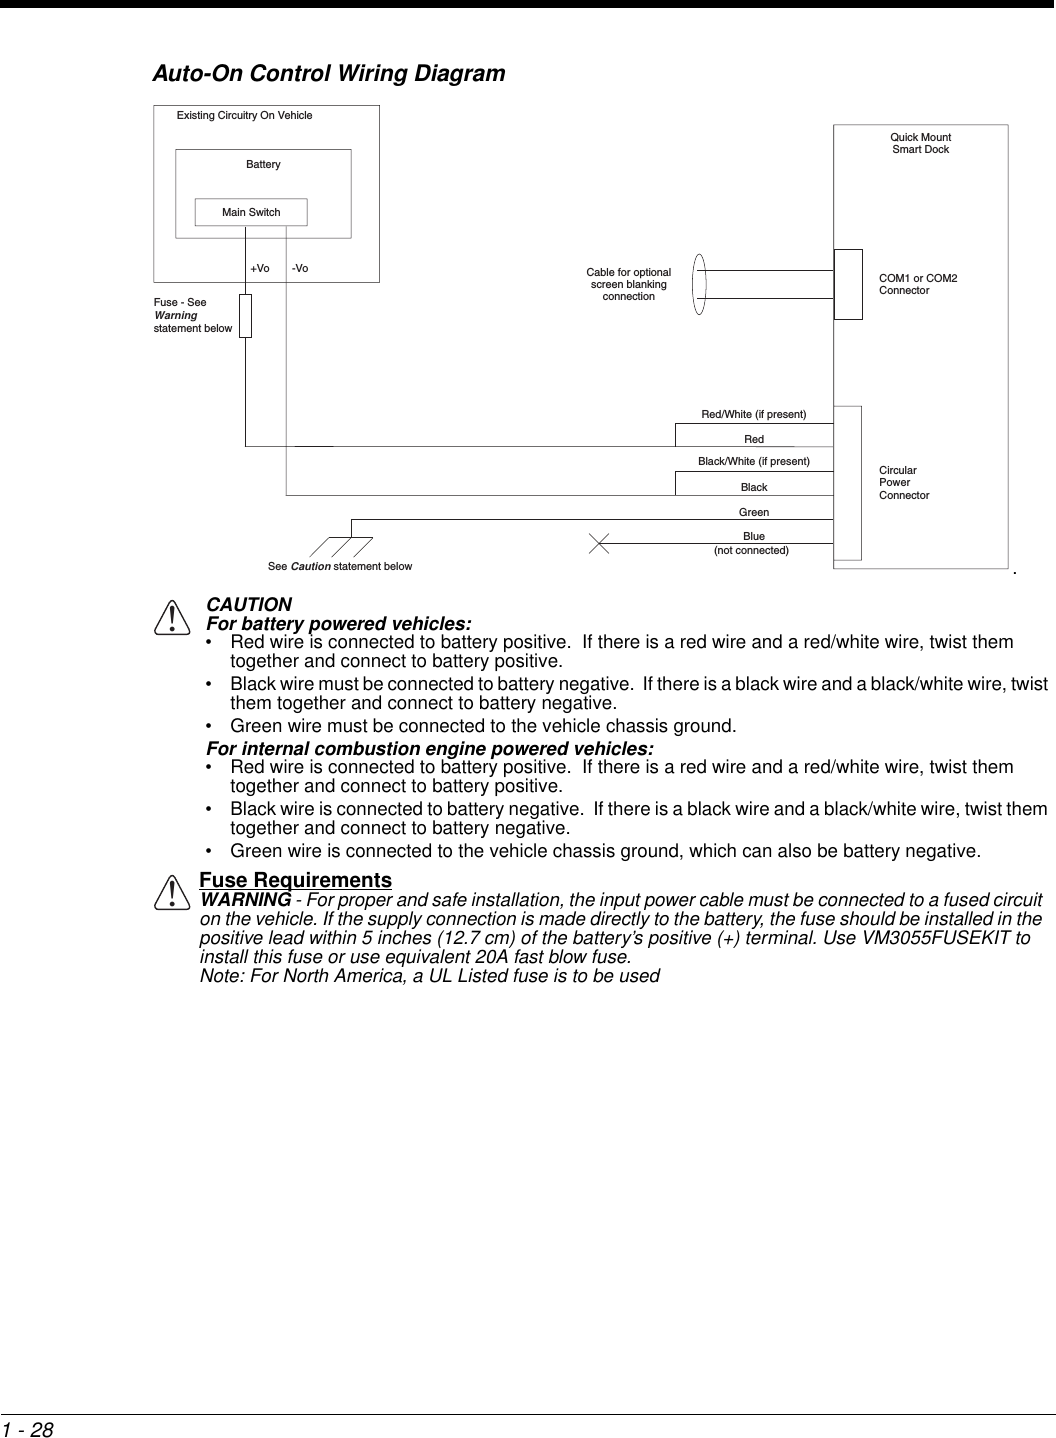 1 - 28Auto-On Control Wiring Diagram.CAUTIONFor battery powered vehicles:• Red wire is connected to battery positive.  If there is a red wire and a red/white wire, twist them together and connect to battery positive.• Black wire must be connected to battery negative.  If there is a black wire and a black/white wire, twist them together and connect to battery negative.• Green wire must be connected to the vehicle chassis ground.For internal combustion engine powered vehicles:• Red wire is connected to battery positive.  If there is a red wire and a red/white wire, twist them together and connect to battery positive.• Black wire is connected to battery negative.  If there is a black wire and a black/white wire, twist them together and connect to battery negative.• Green wire is connected to the vehicle chassis ground, which can also be battery negative.Fuse RequirementsWARNING - For proper and safe installation, the input power cable must be connected to a fused circuit on the vehicle. If the supply connection is made directly to the battery, the fuse should be installed in the positive lead within 5 inches (12.7 cm) of the battery’s positive (+) terminal. Use VM3055FUSEKIT to install this fuse or use equivalent 20A fast blow fuse.Note: For North America, a UL Listed fuse is to be usedQuick MountSmart DockCircularPowerConnectorCOM1 or COM2ConnectorExisting Circuitry On VehicleBatteryMain Switch-Vo+Vo Cable for optionalscreen blankingconnectionSee Caution statement belowFuse - SeeWarning statement below (not connected)RedBlackGreenBlueRed/White (if present)Black/White (if present)!!